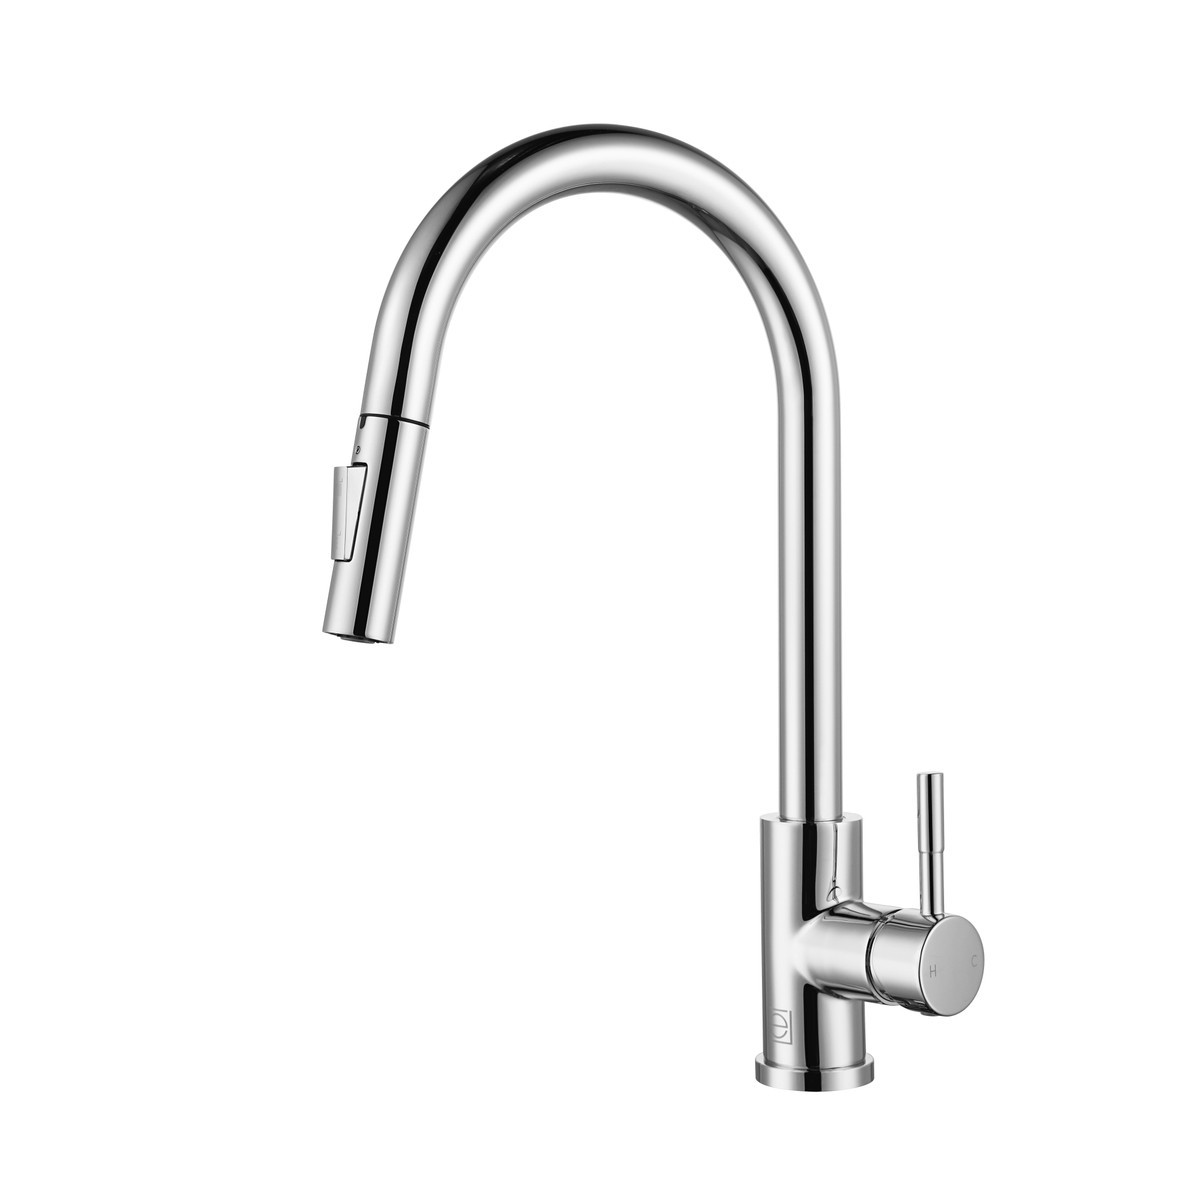 ELEGANT FURNITURE LIGHTING FAK-306 LUCA 16 INCH SINGLE HANDLE PULL DOWN SPRAYER KITCHEN FAUCET WITH TOUCH SENSOR